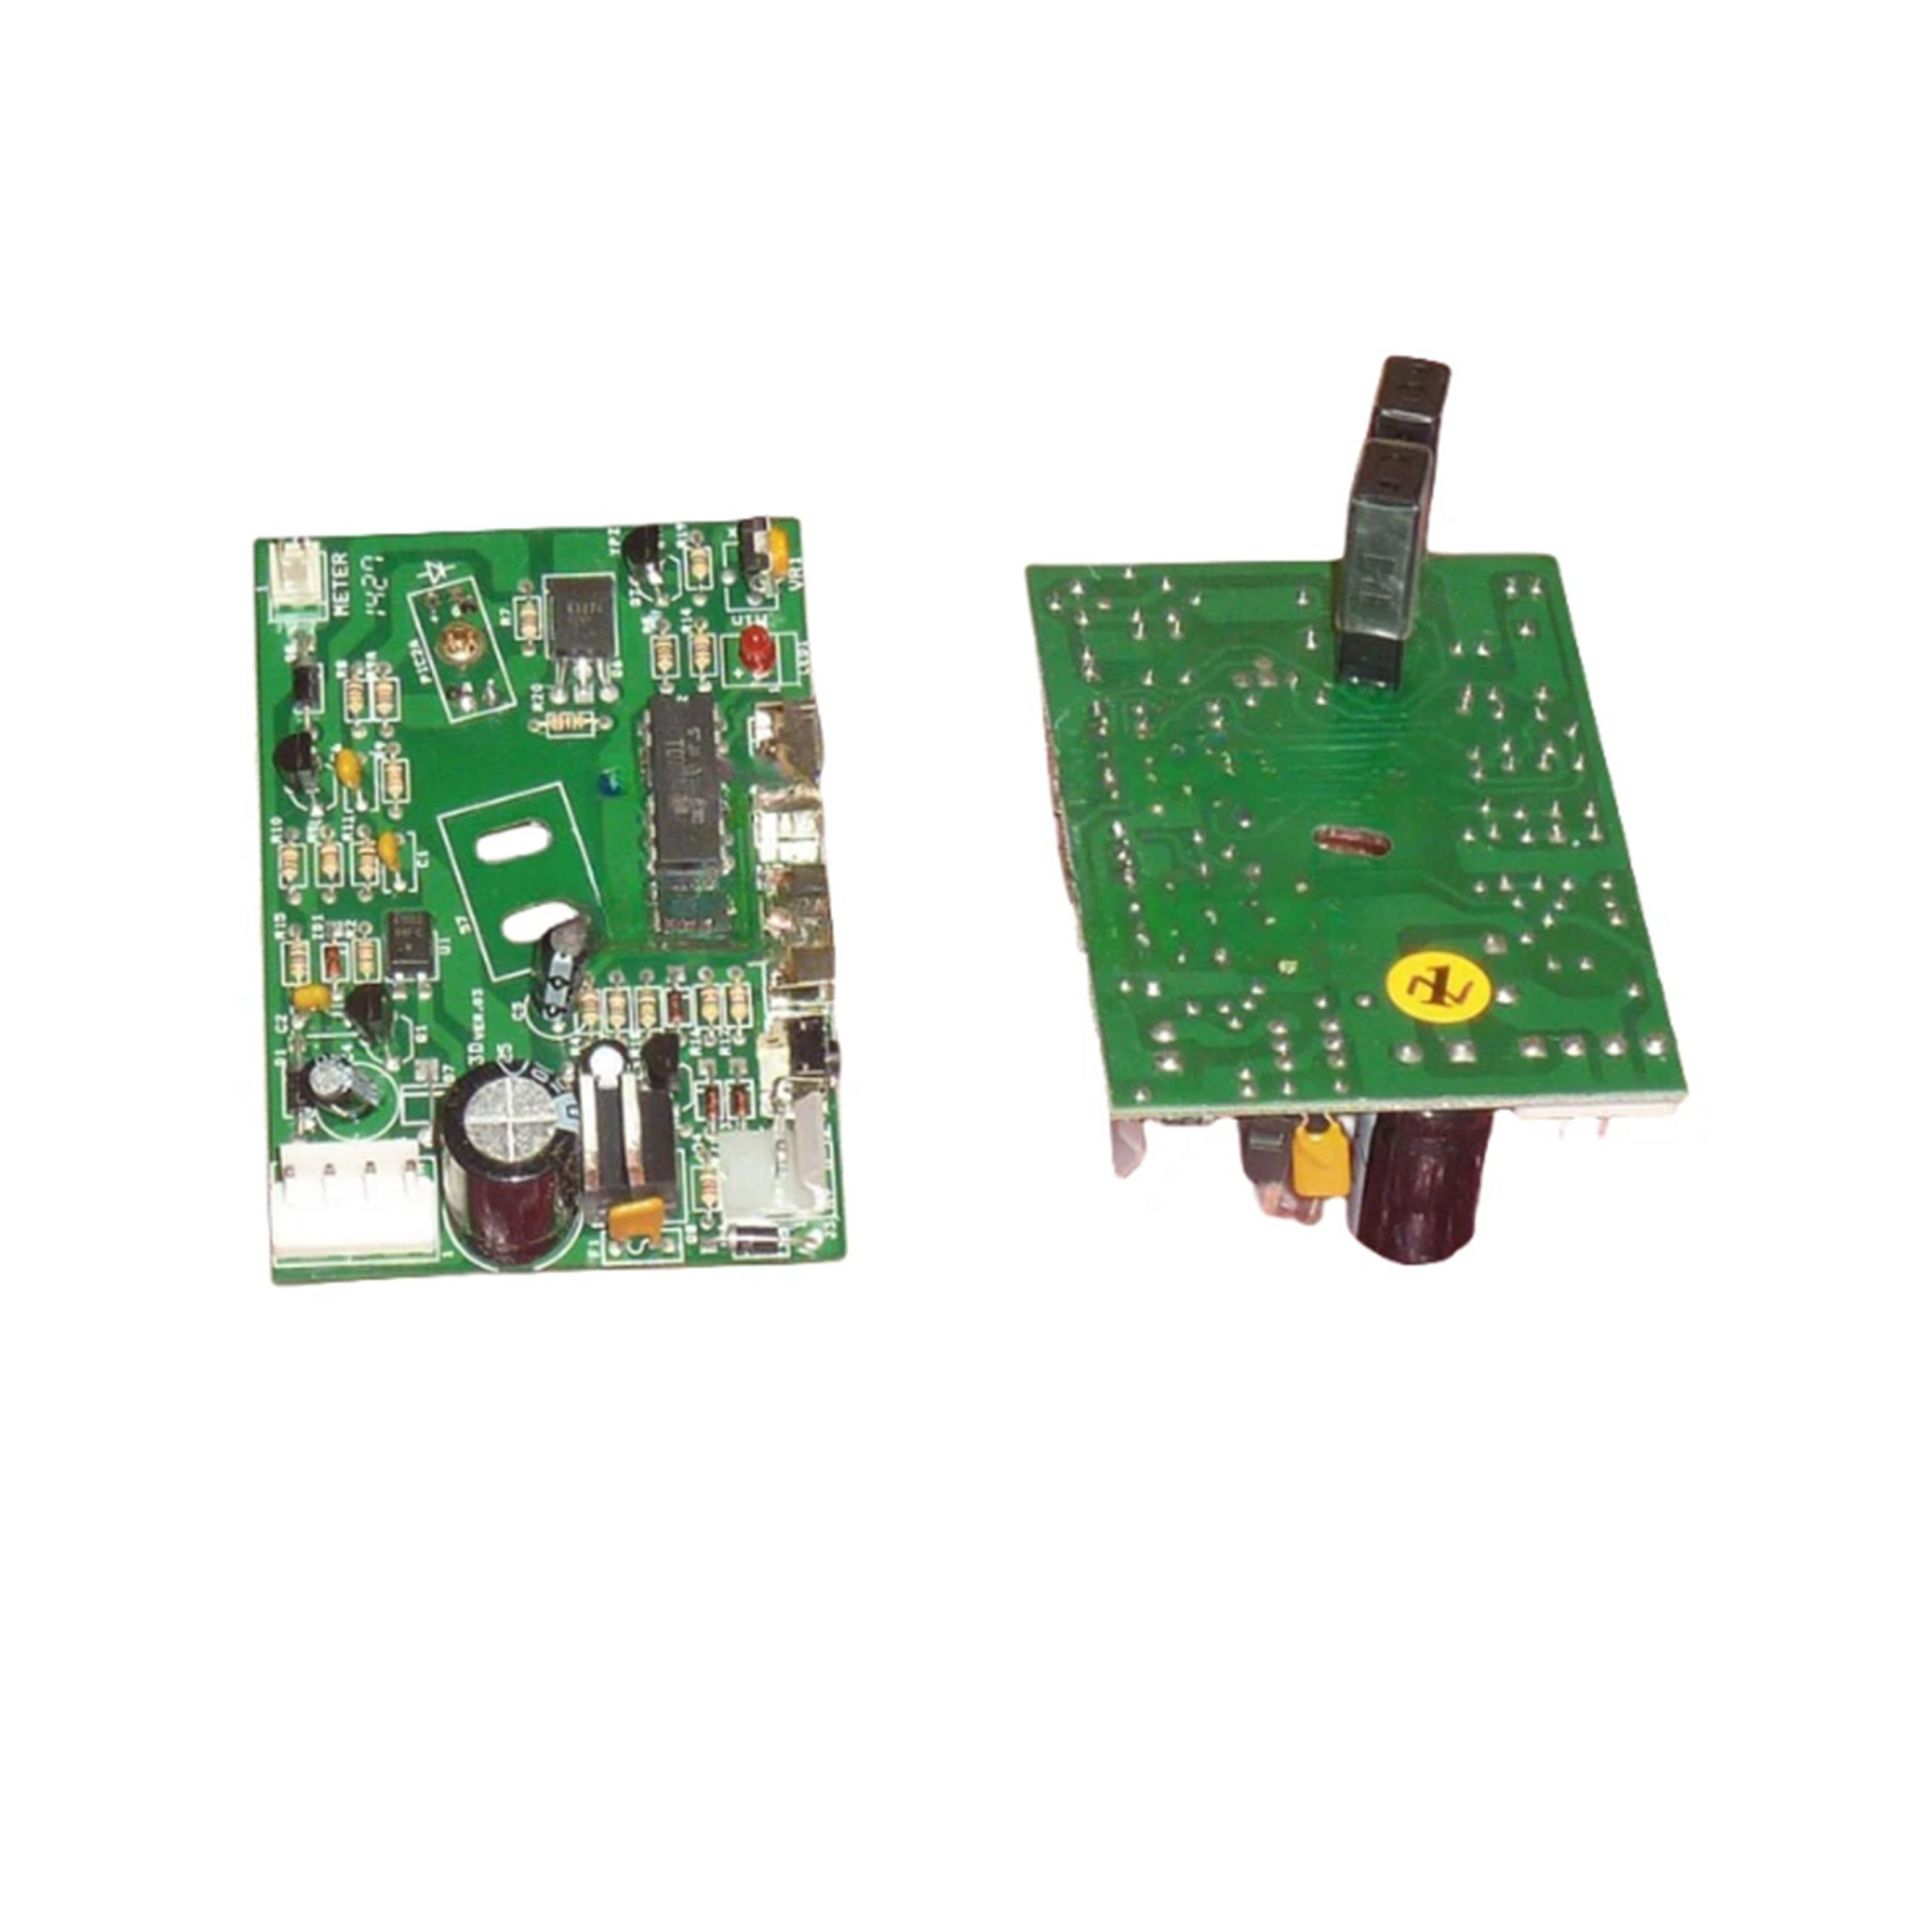 CL-002Q-386 Ticket Dispencer, Mainboard_